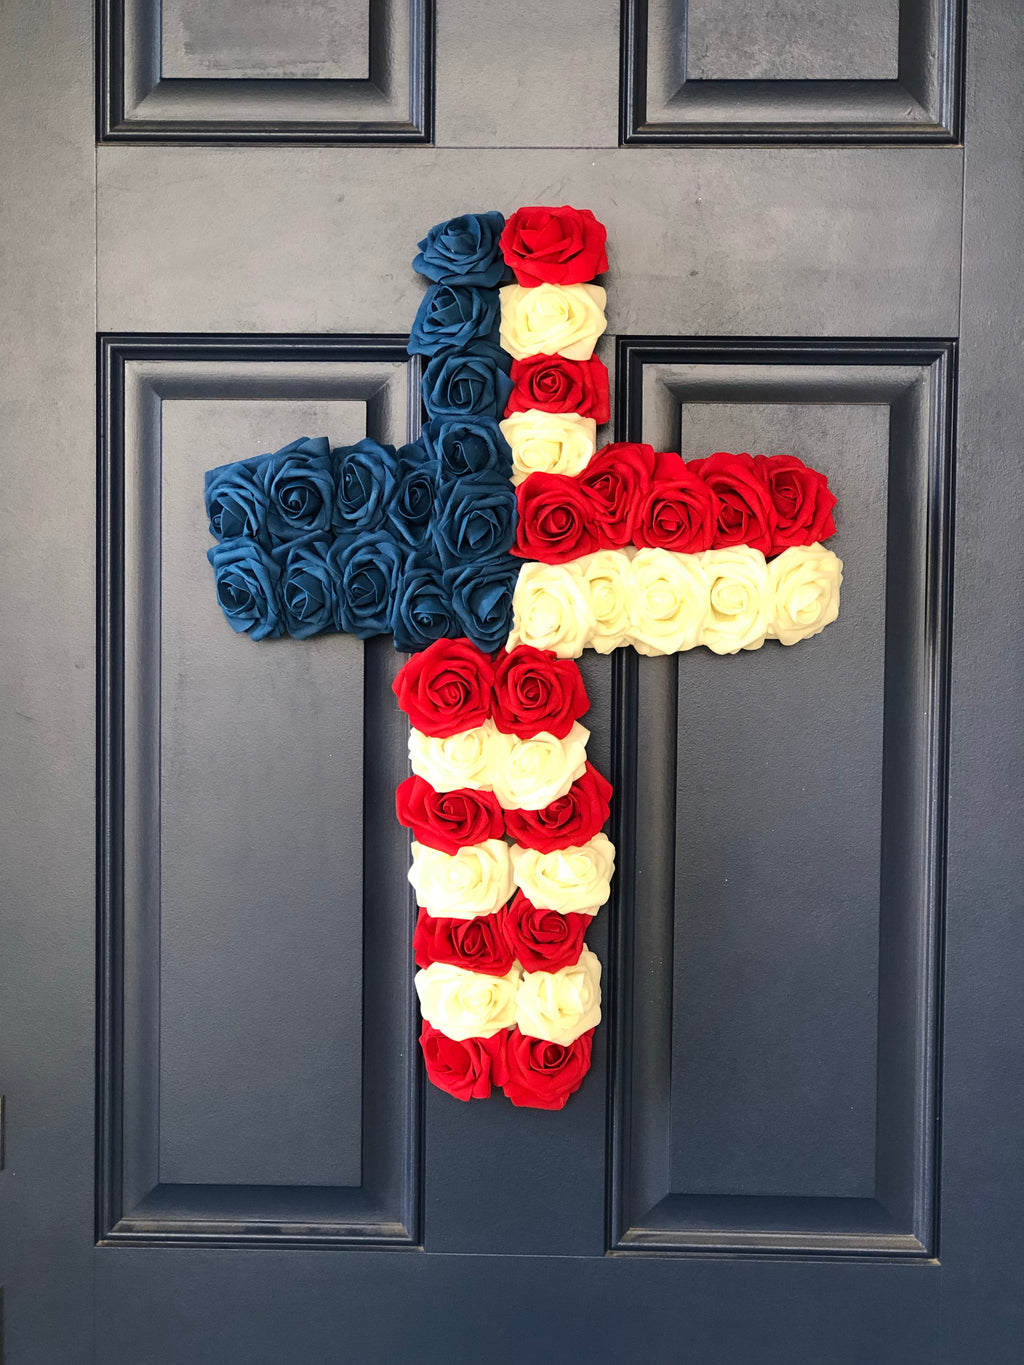 Red, White and Blue Roses in the shape of a cross on a blue door